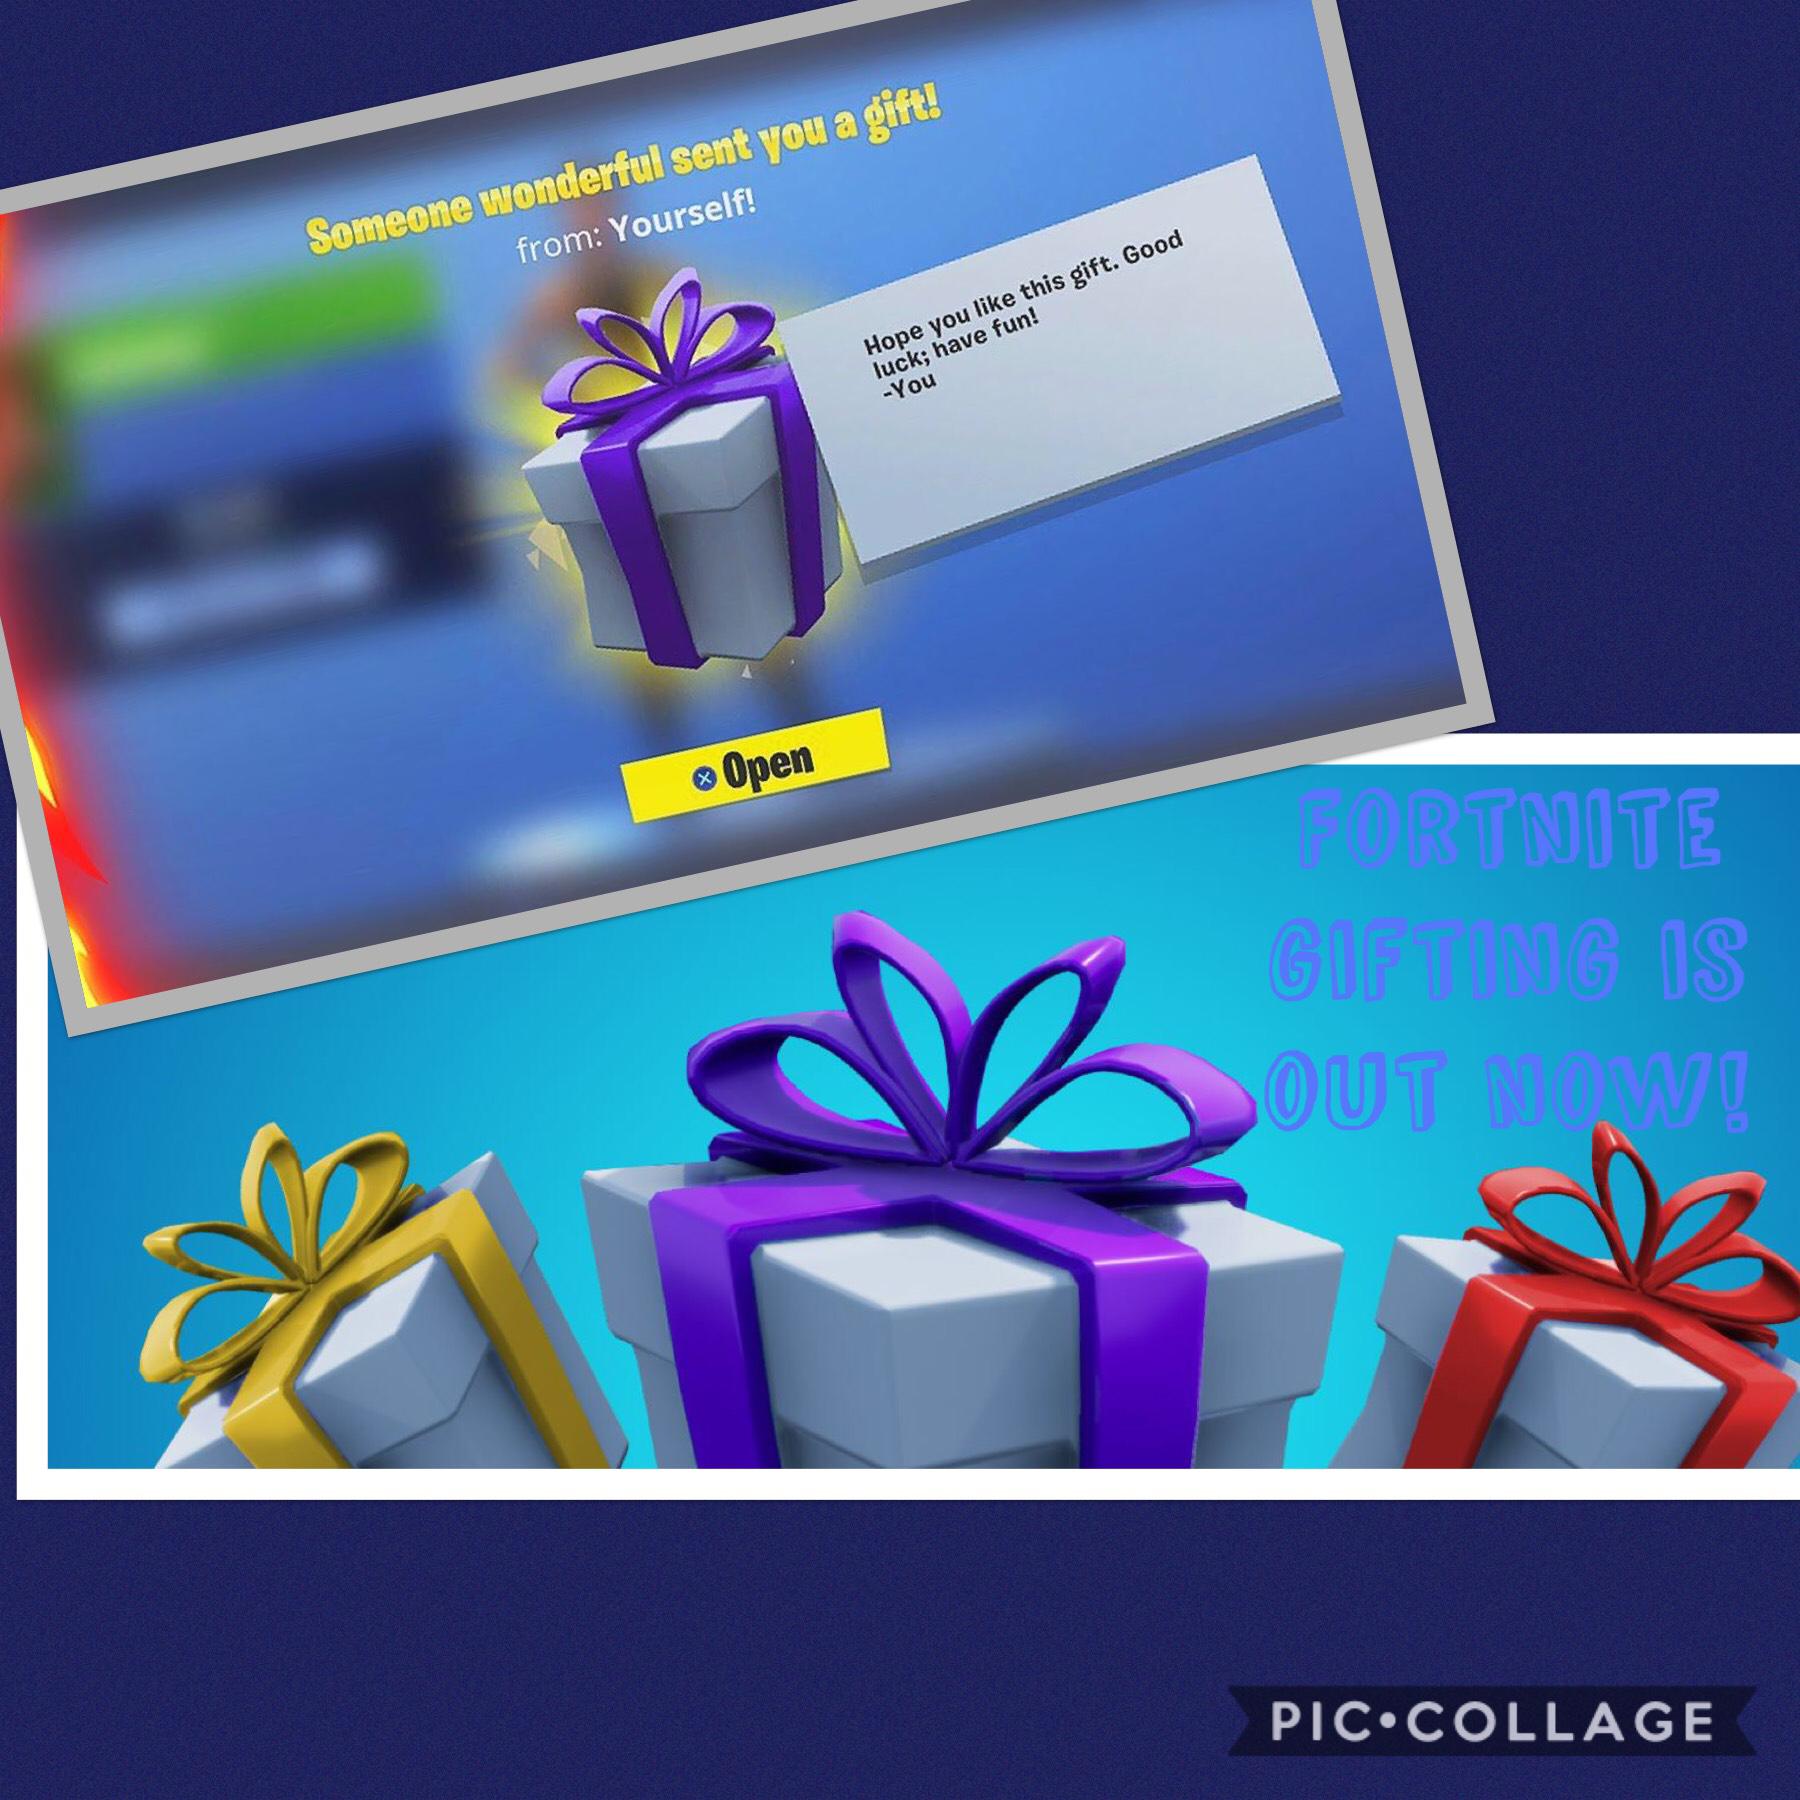 Fortnite gifting is out now! Follow me unknown_clanz on Twitter, Instagram and YouTube also follow d.unknown1 on all platforms!